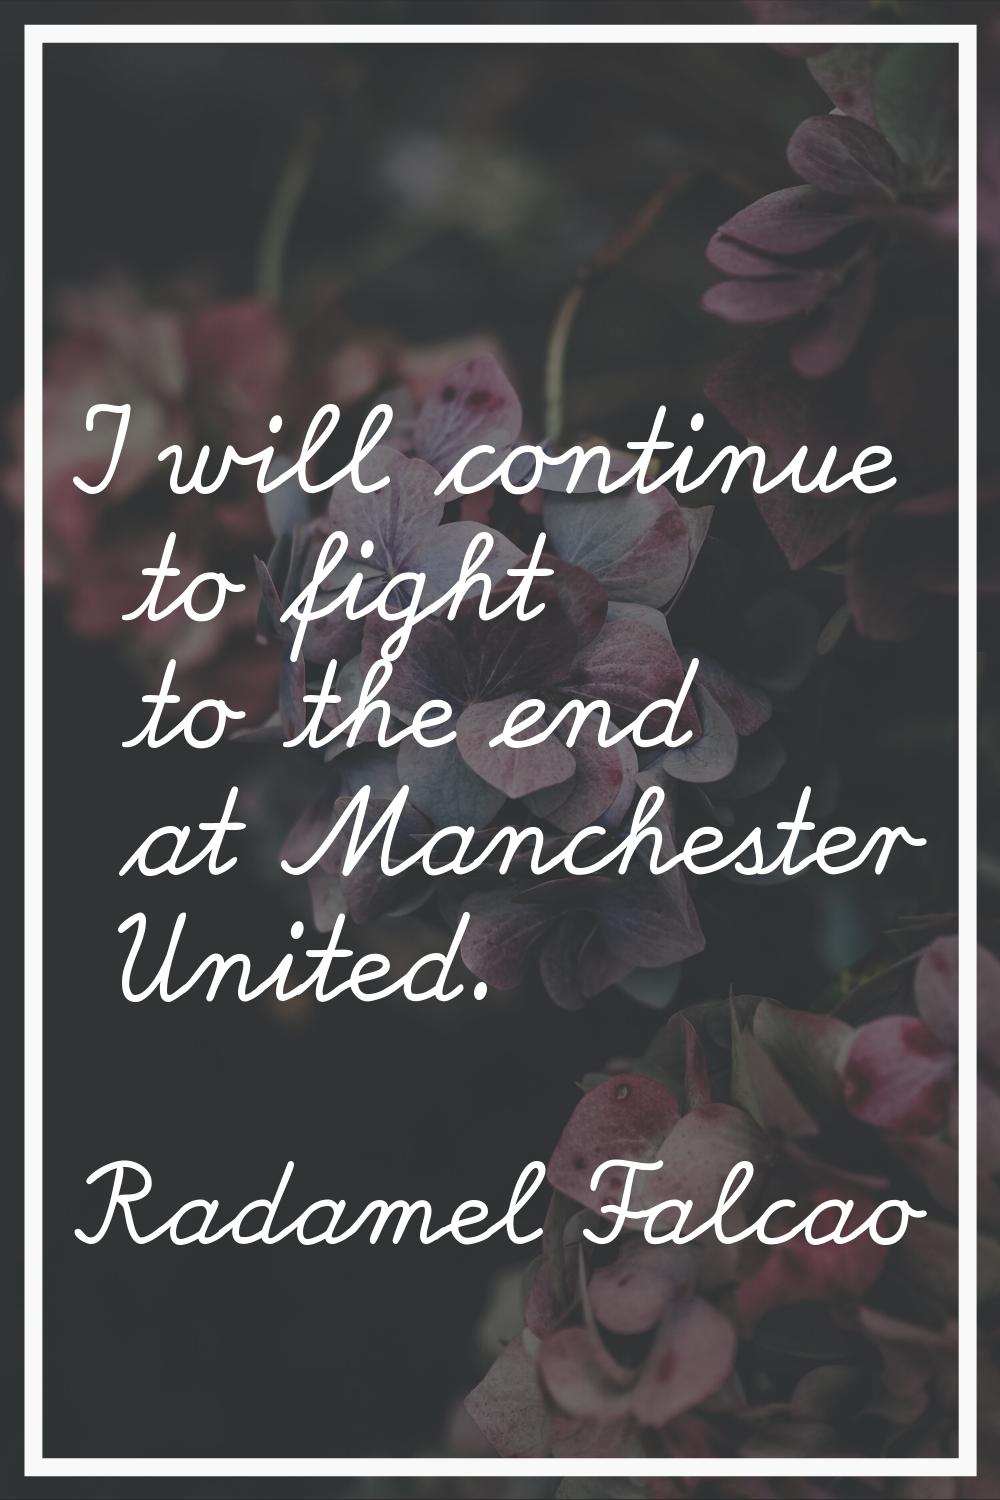 I will continue to fight to the end at Manchester United.